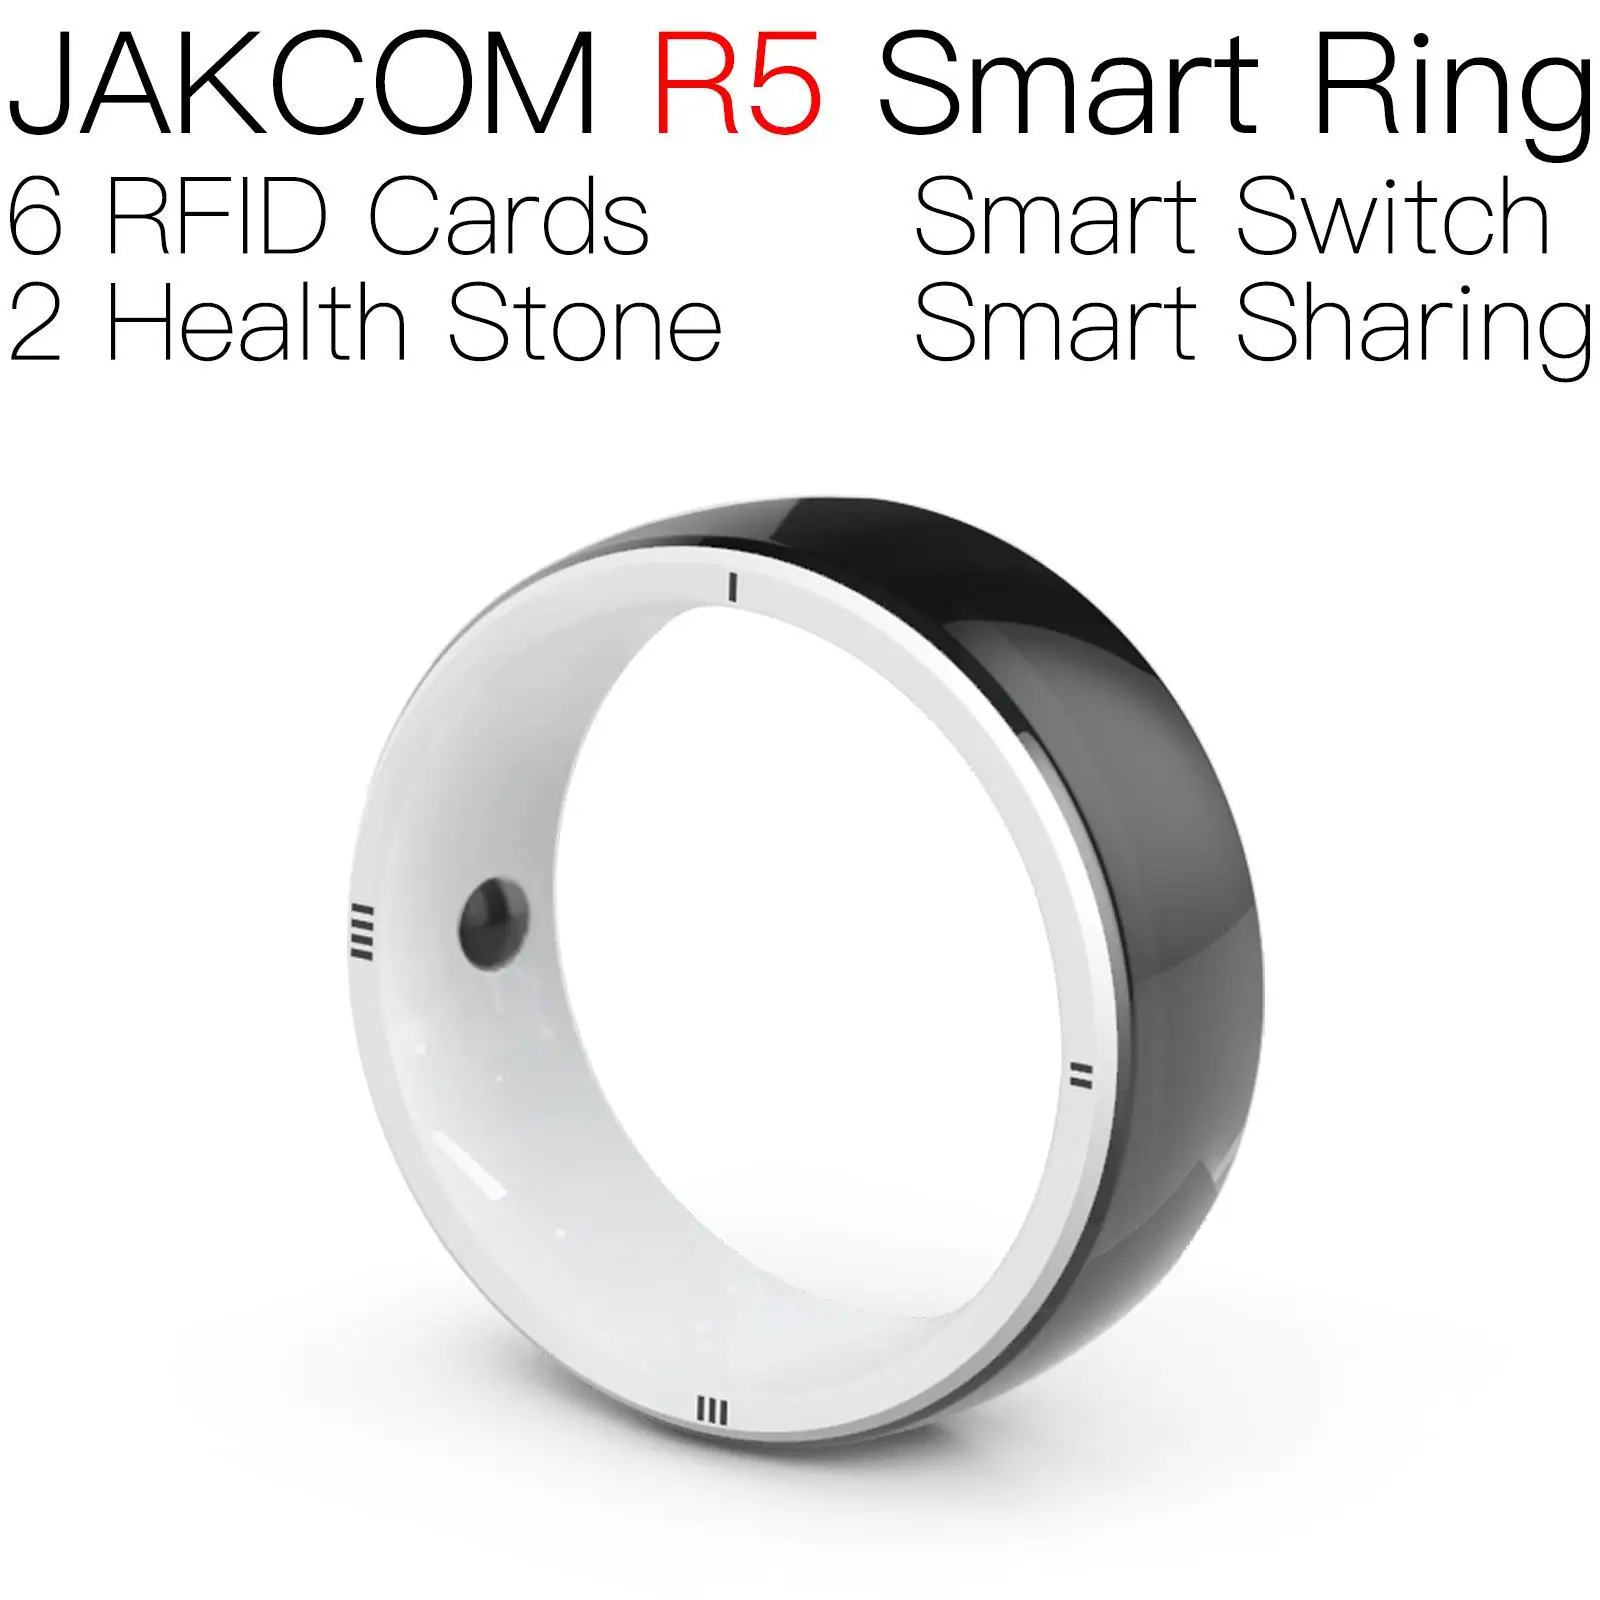 JAKCOM R5 Smart Ring Nice than slippers men watch band 7 watches 2020 luxury promotion 4c p50 designer |